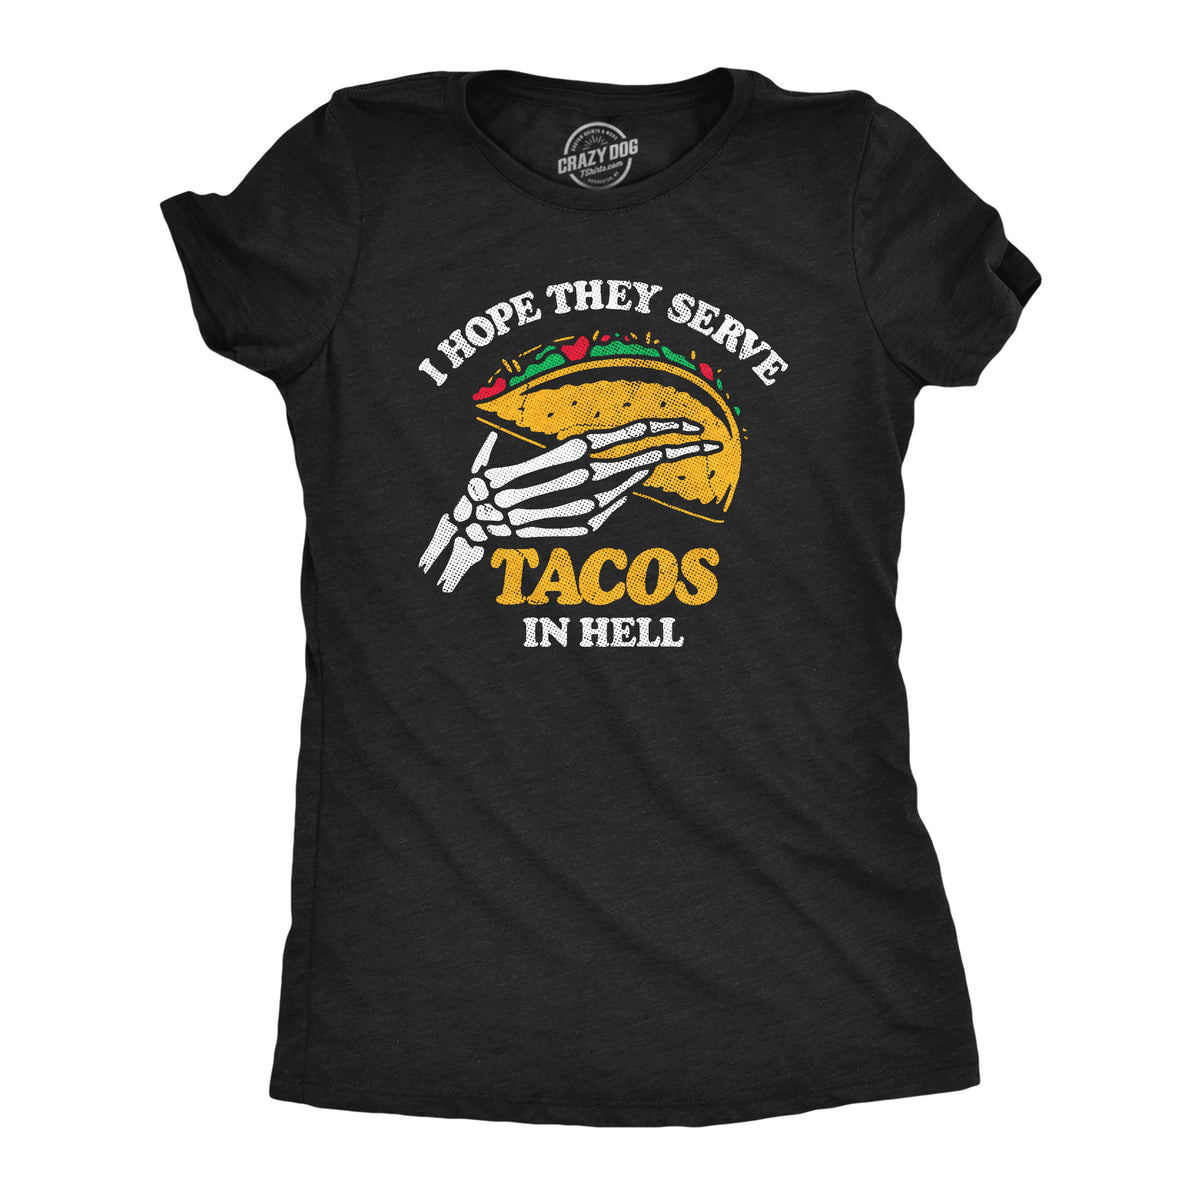 Funny Heather Black - TACOS I Hope They Serve Tacos In Hell Womens T Shirt Nerdy Food sarcastic Tee